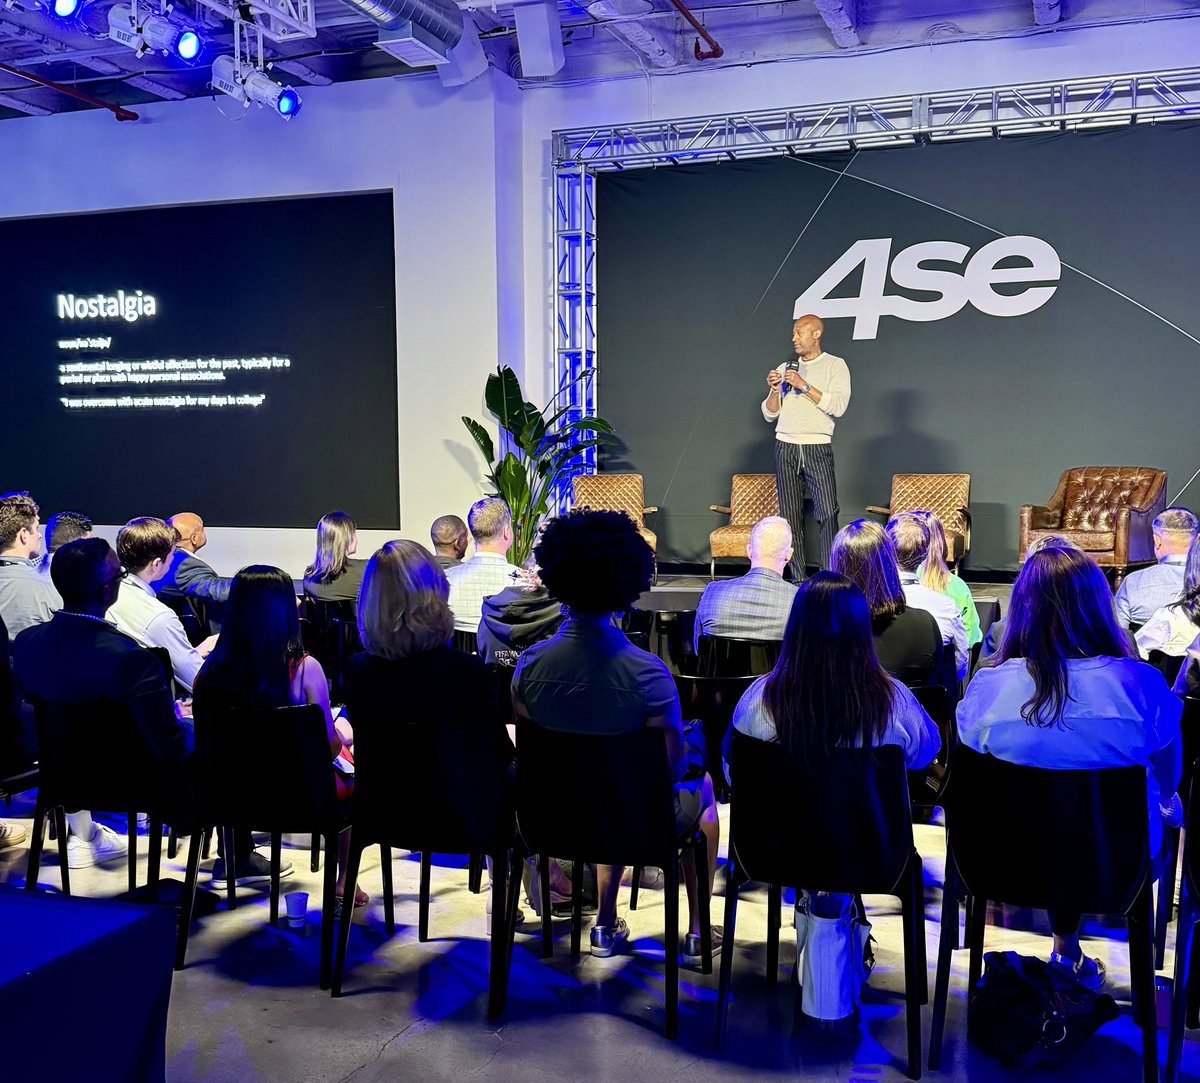 4 Things You Need to Know to Commercialize Nostalgia from @mitchell_ness CEO Eli Kumekpor at @4se_events 👀

- Reinterpreting the past without reliving the past
- Establishing emotional connections
- Social emotion
- Cultivating an aesthetic